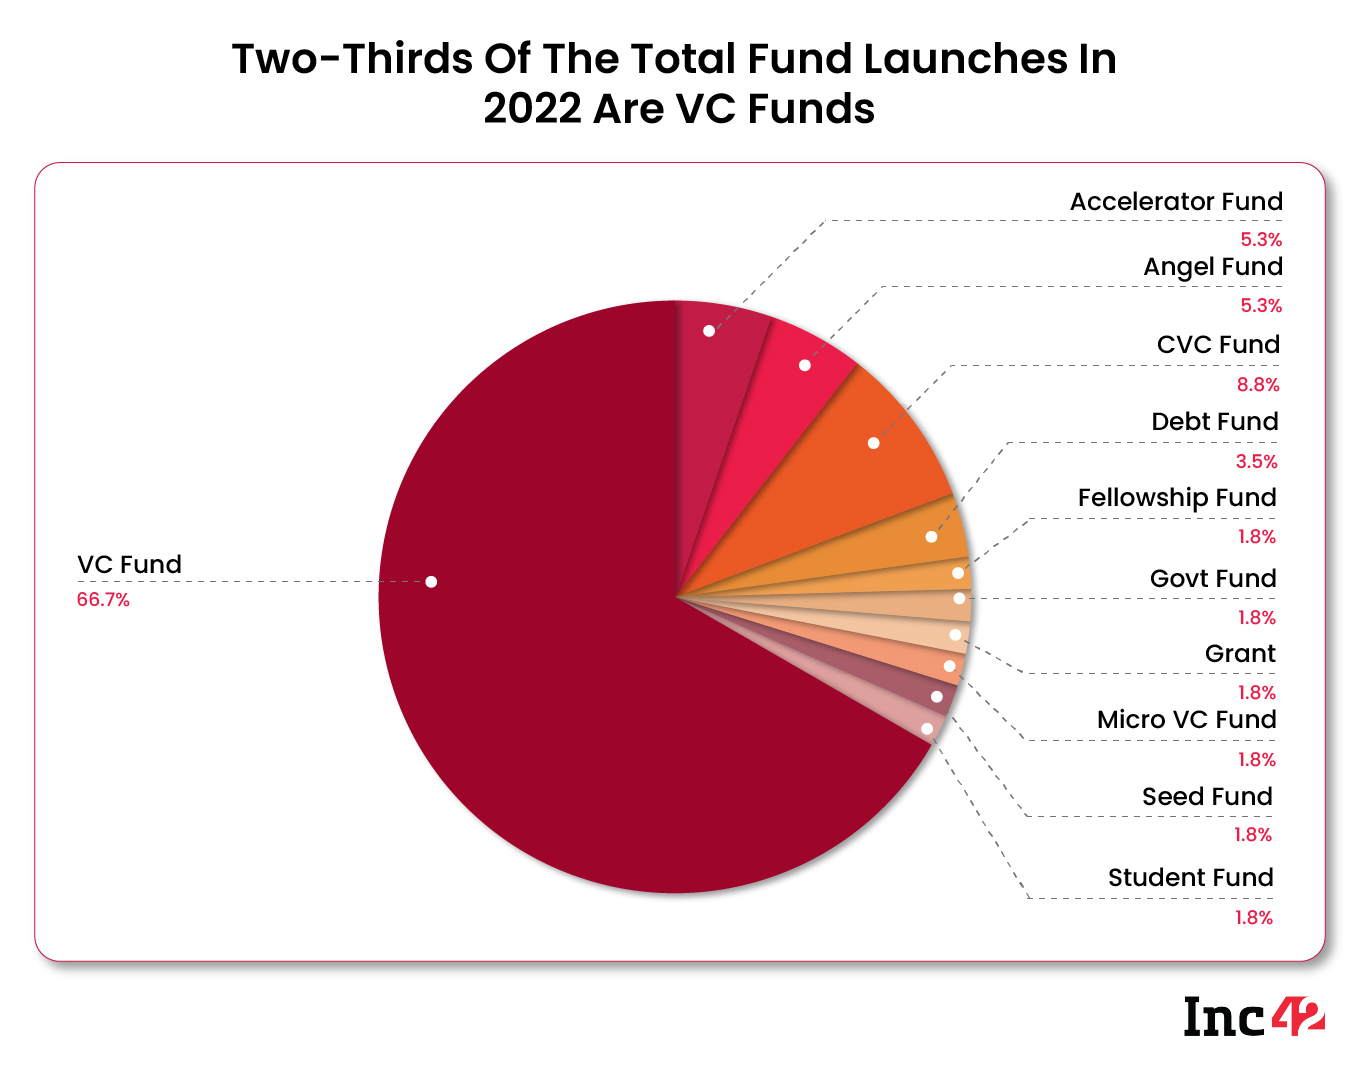 A majority of startup funds launched in 2022 are VC funds